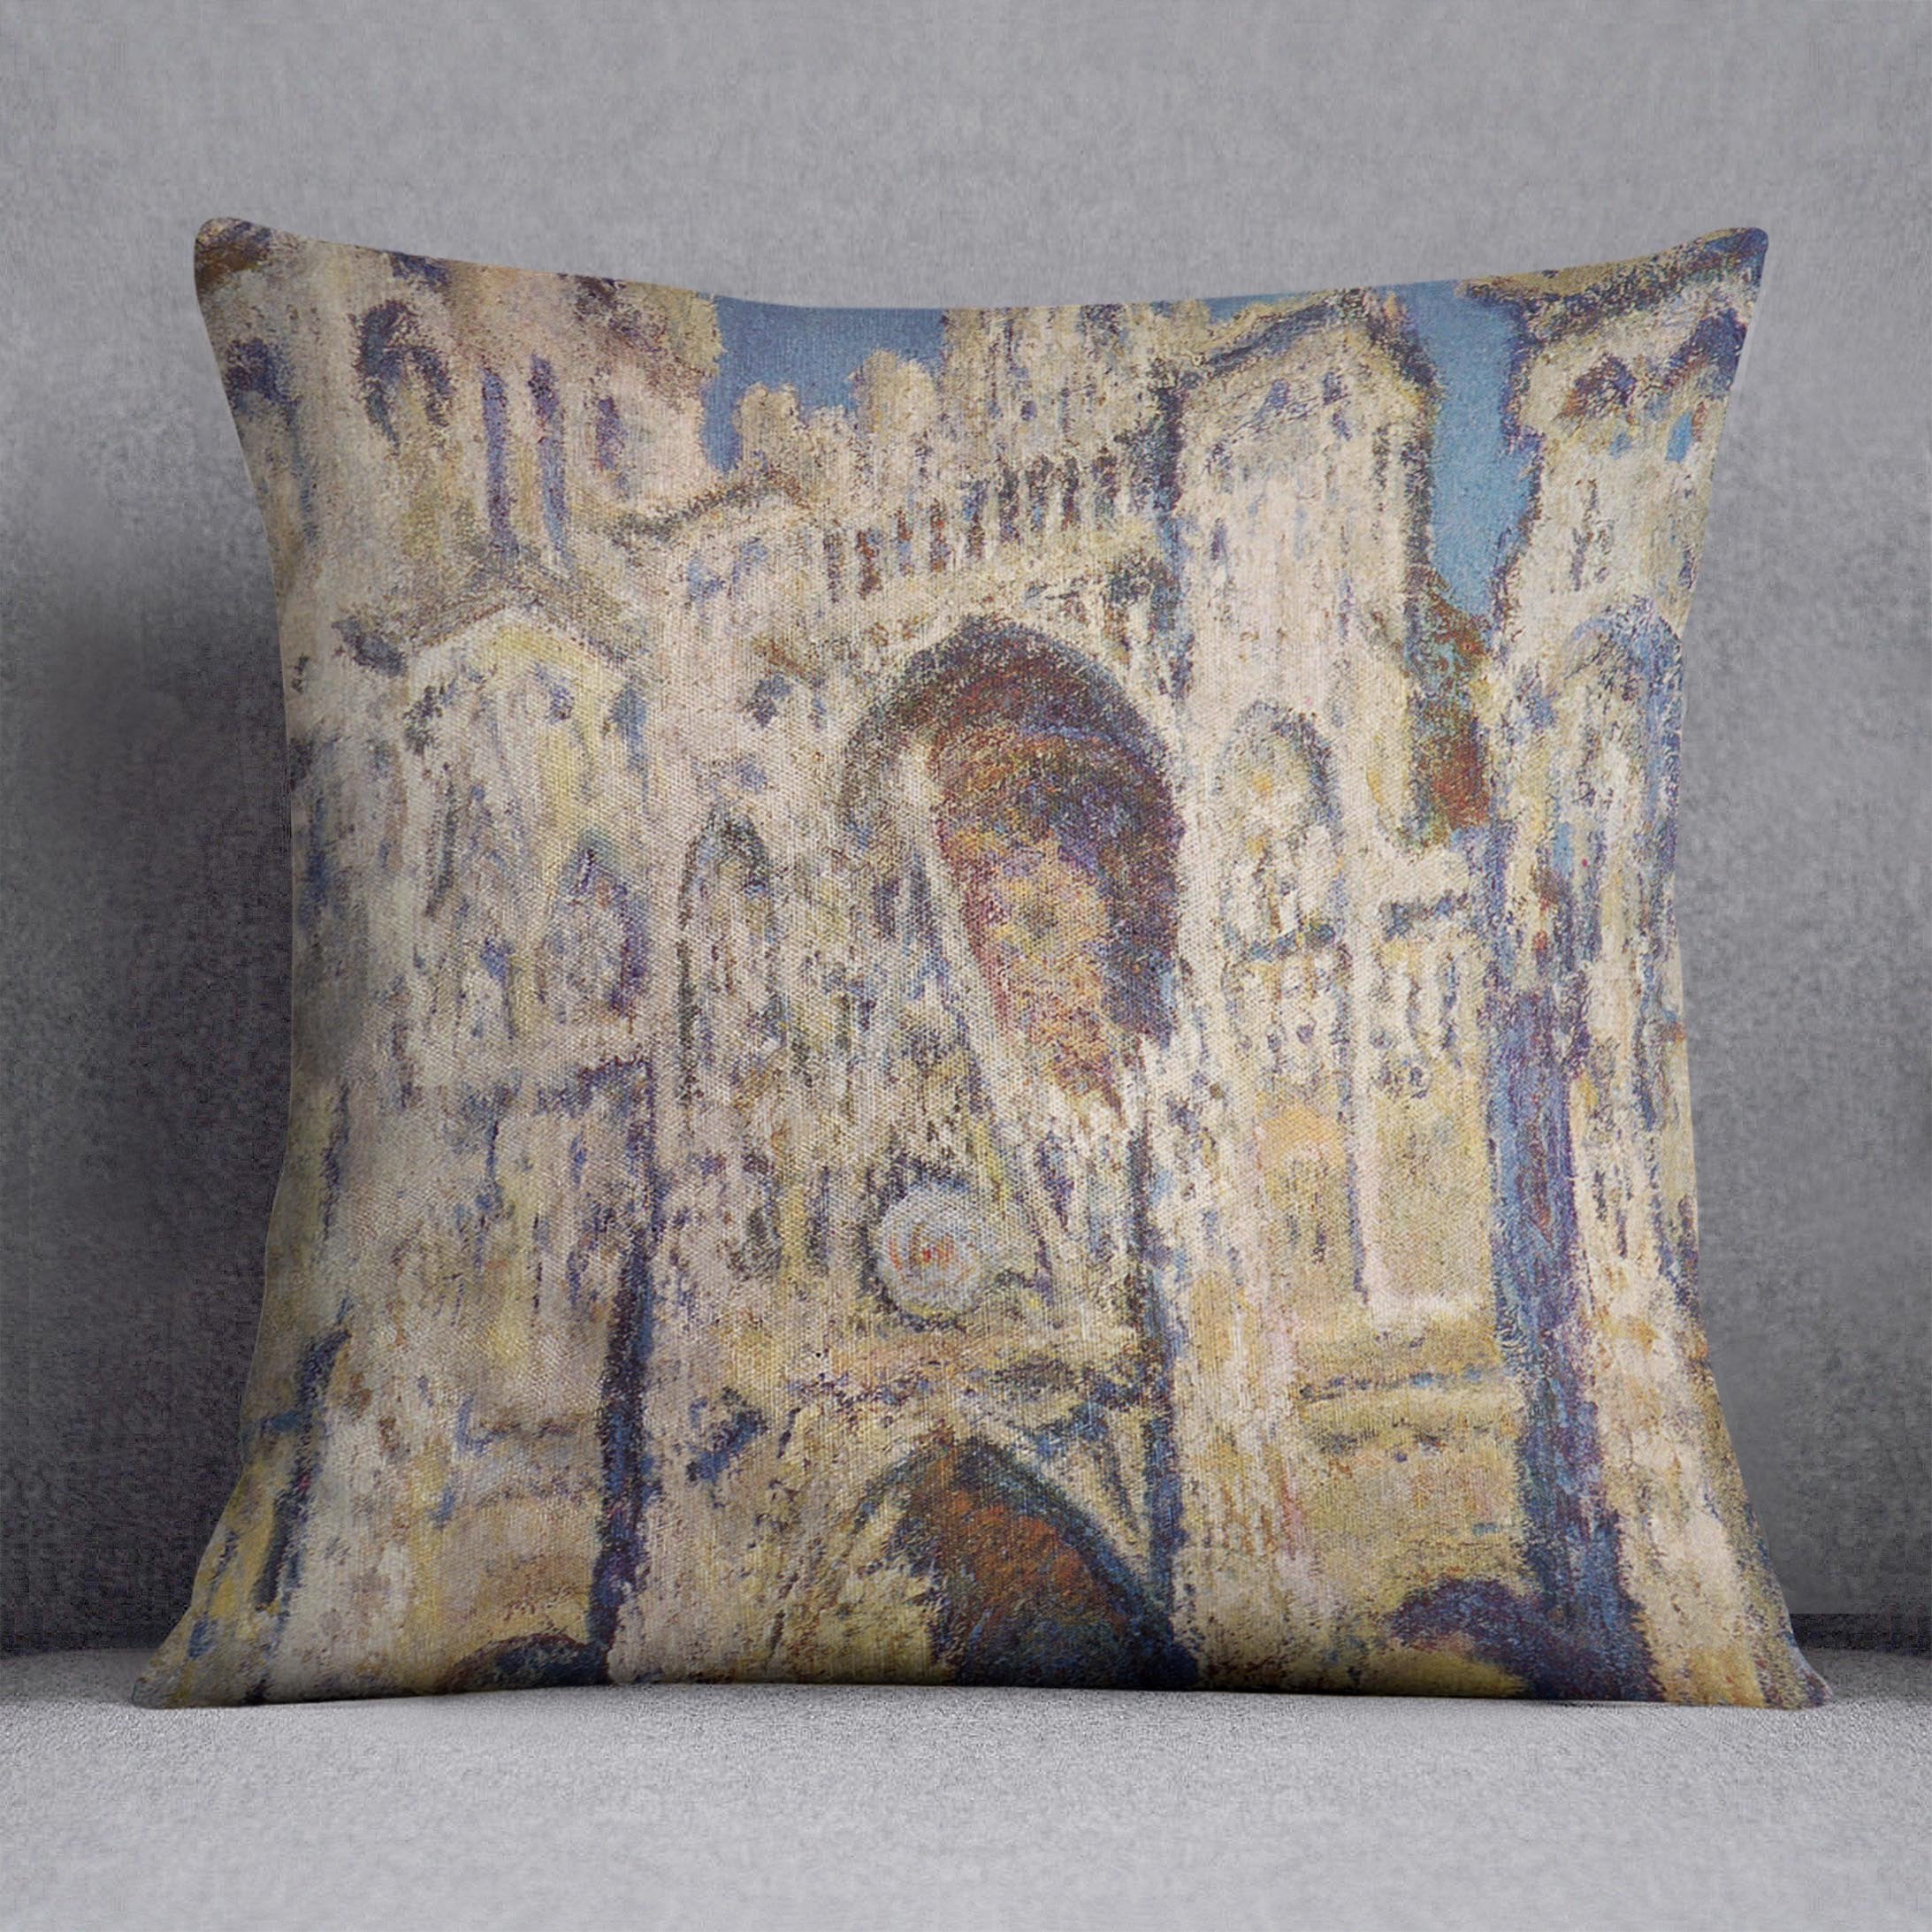 Cathedral at Rouen by Monet Throw Pillow